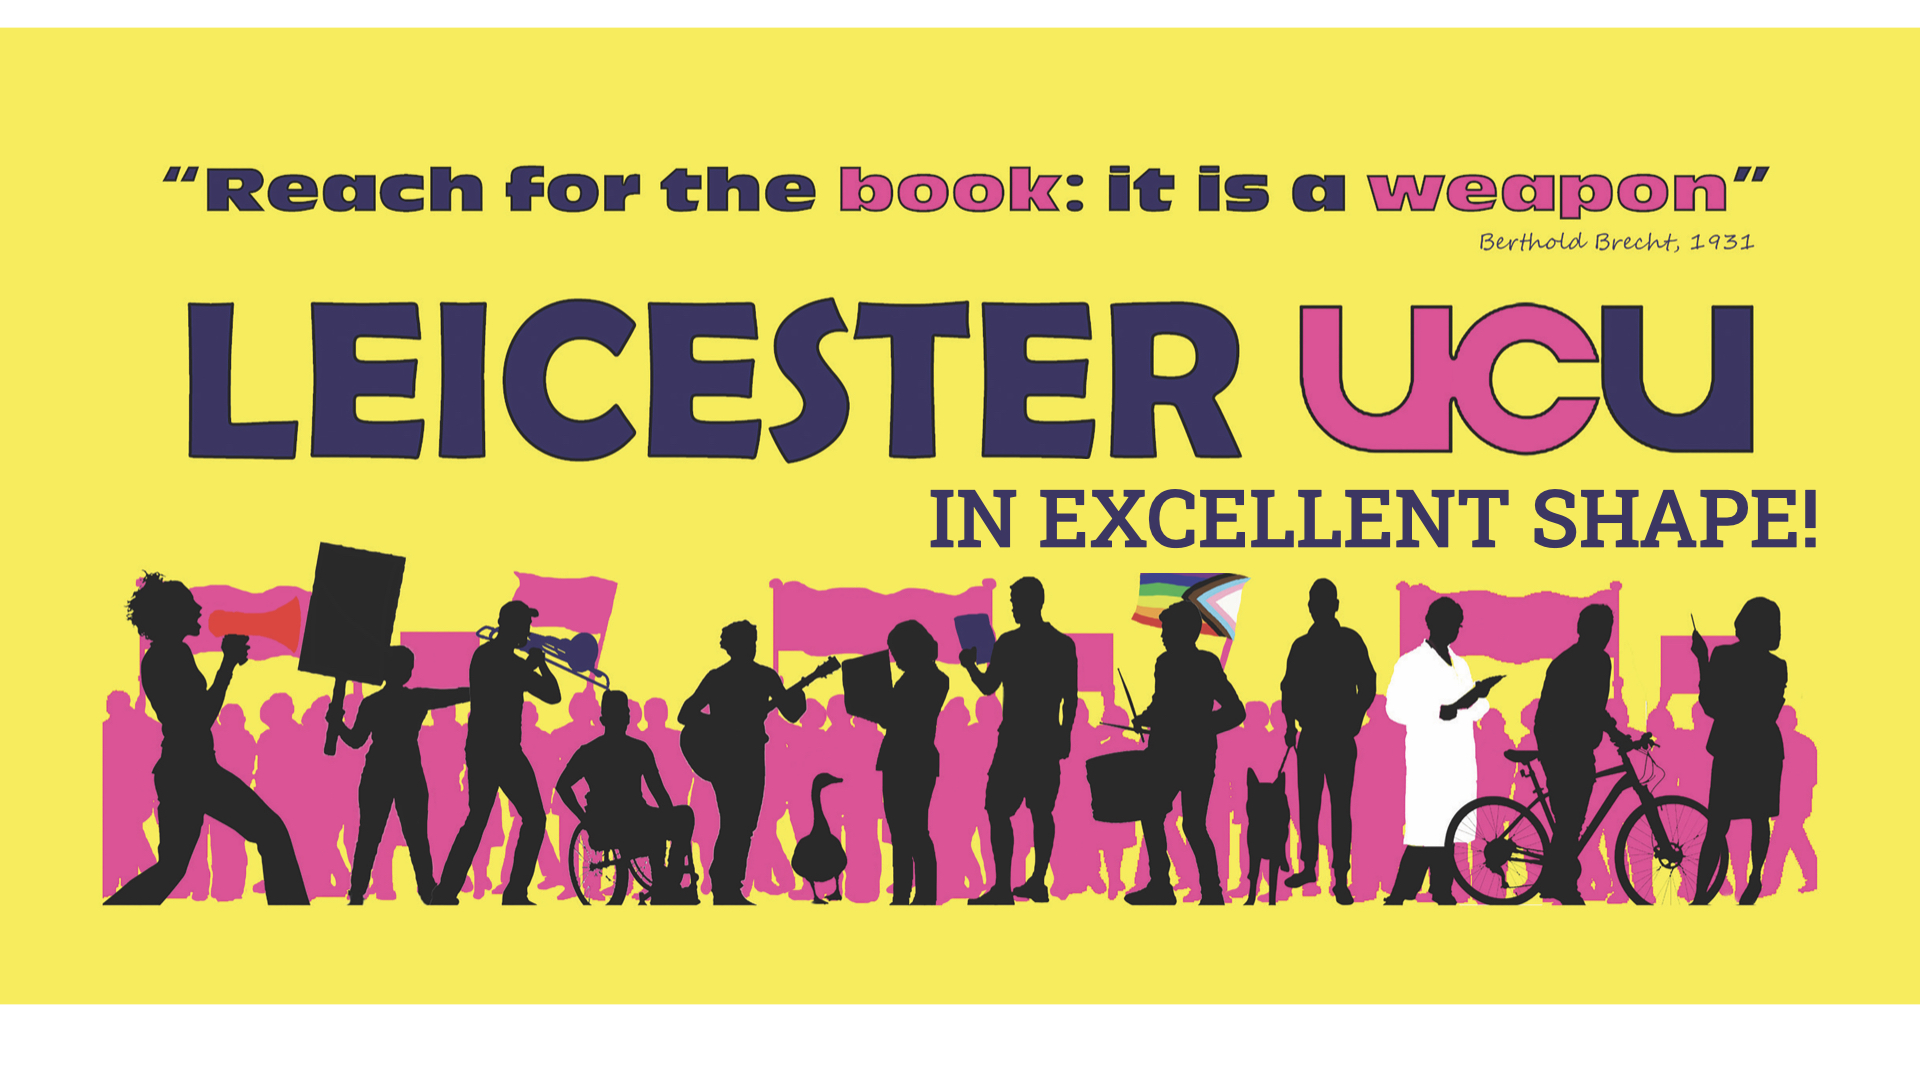 Leicester UCU banner image, pink and black figures picketing against a yellow background